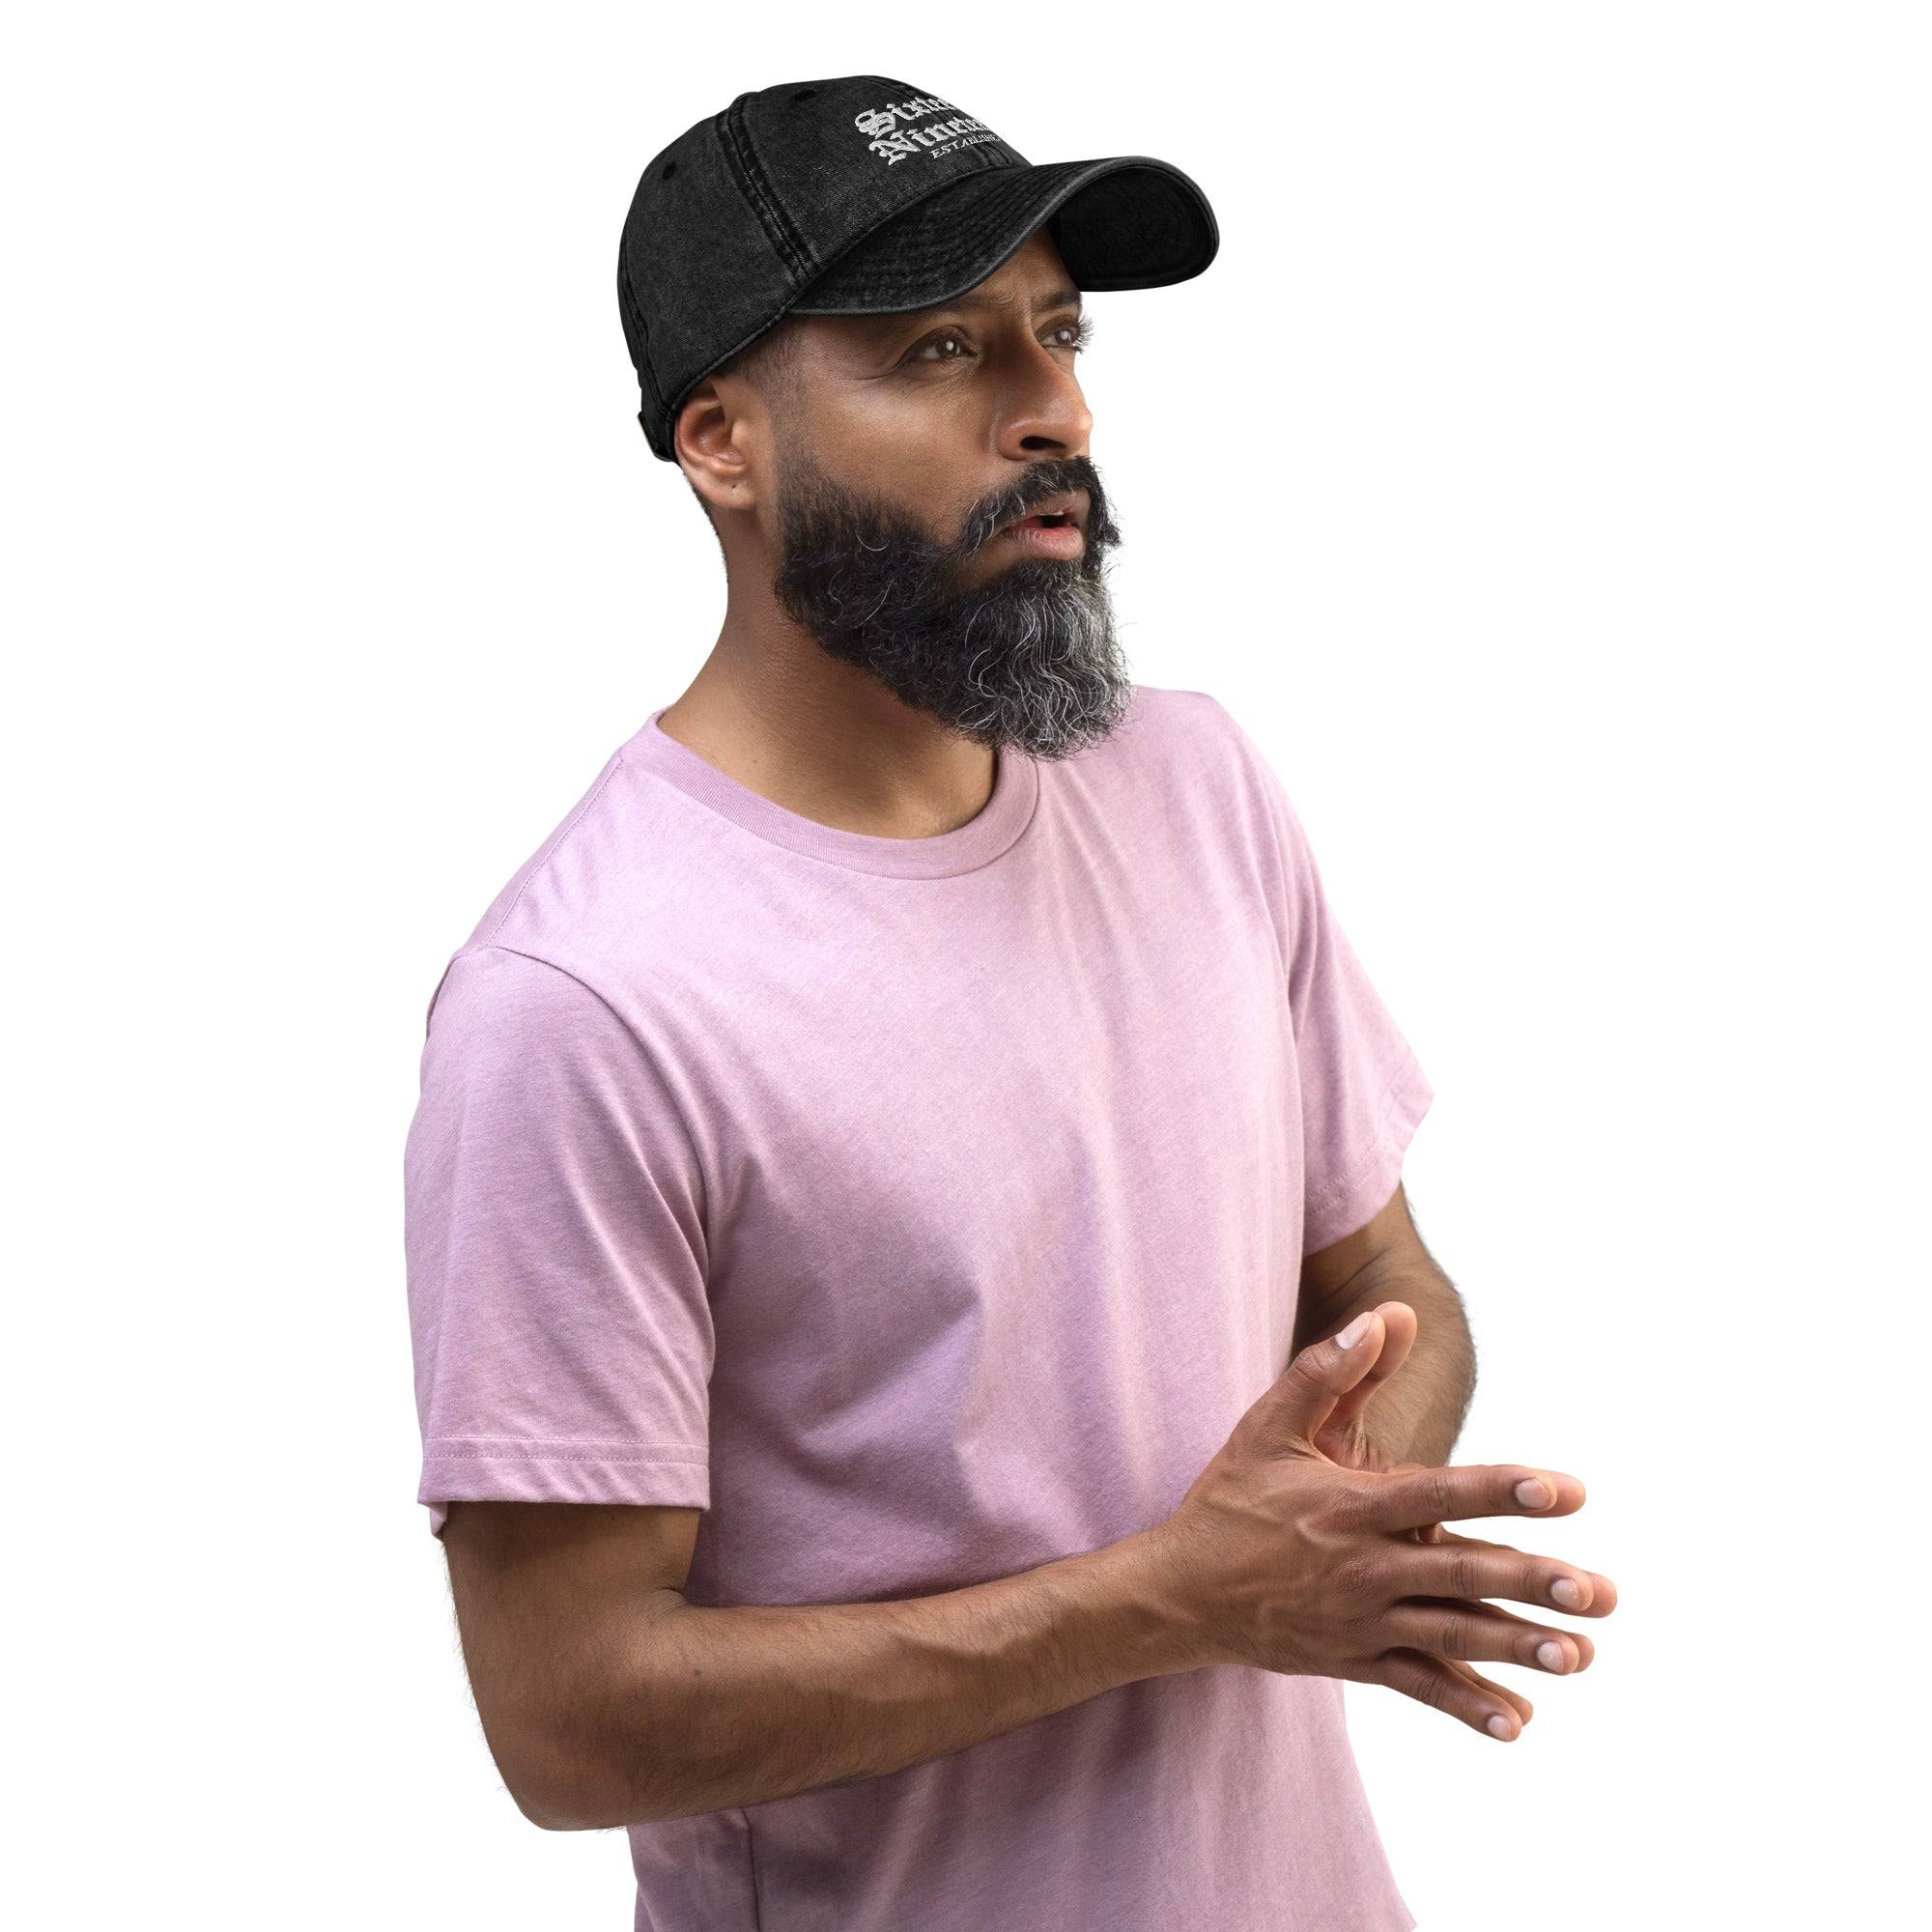 a man with a beard wearing a pink shirt and a black hat